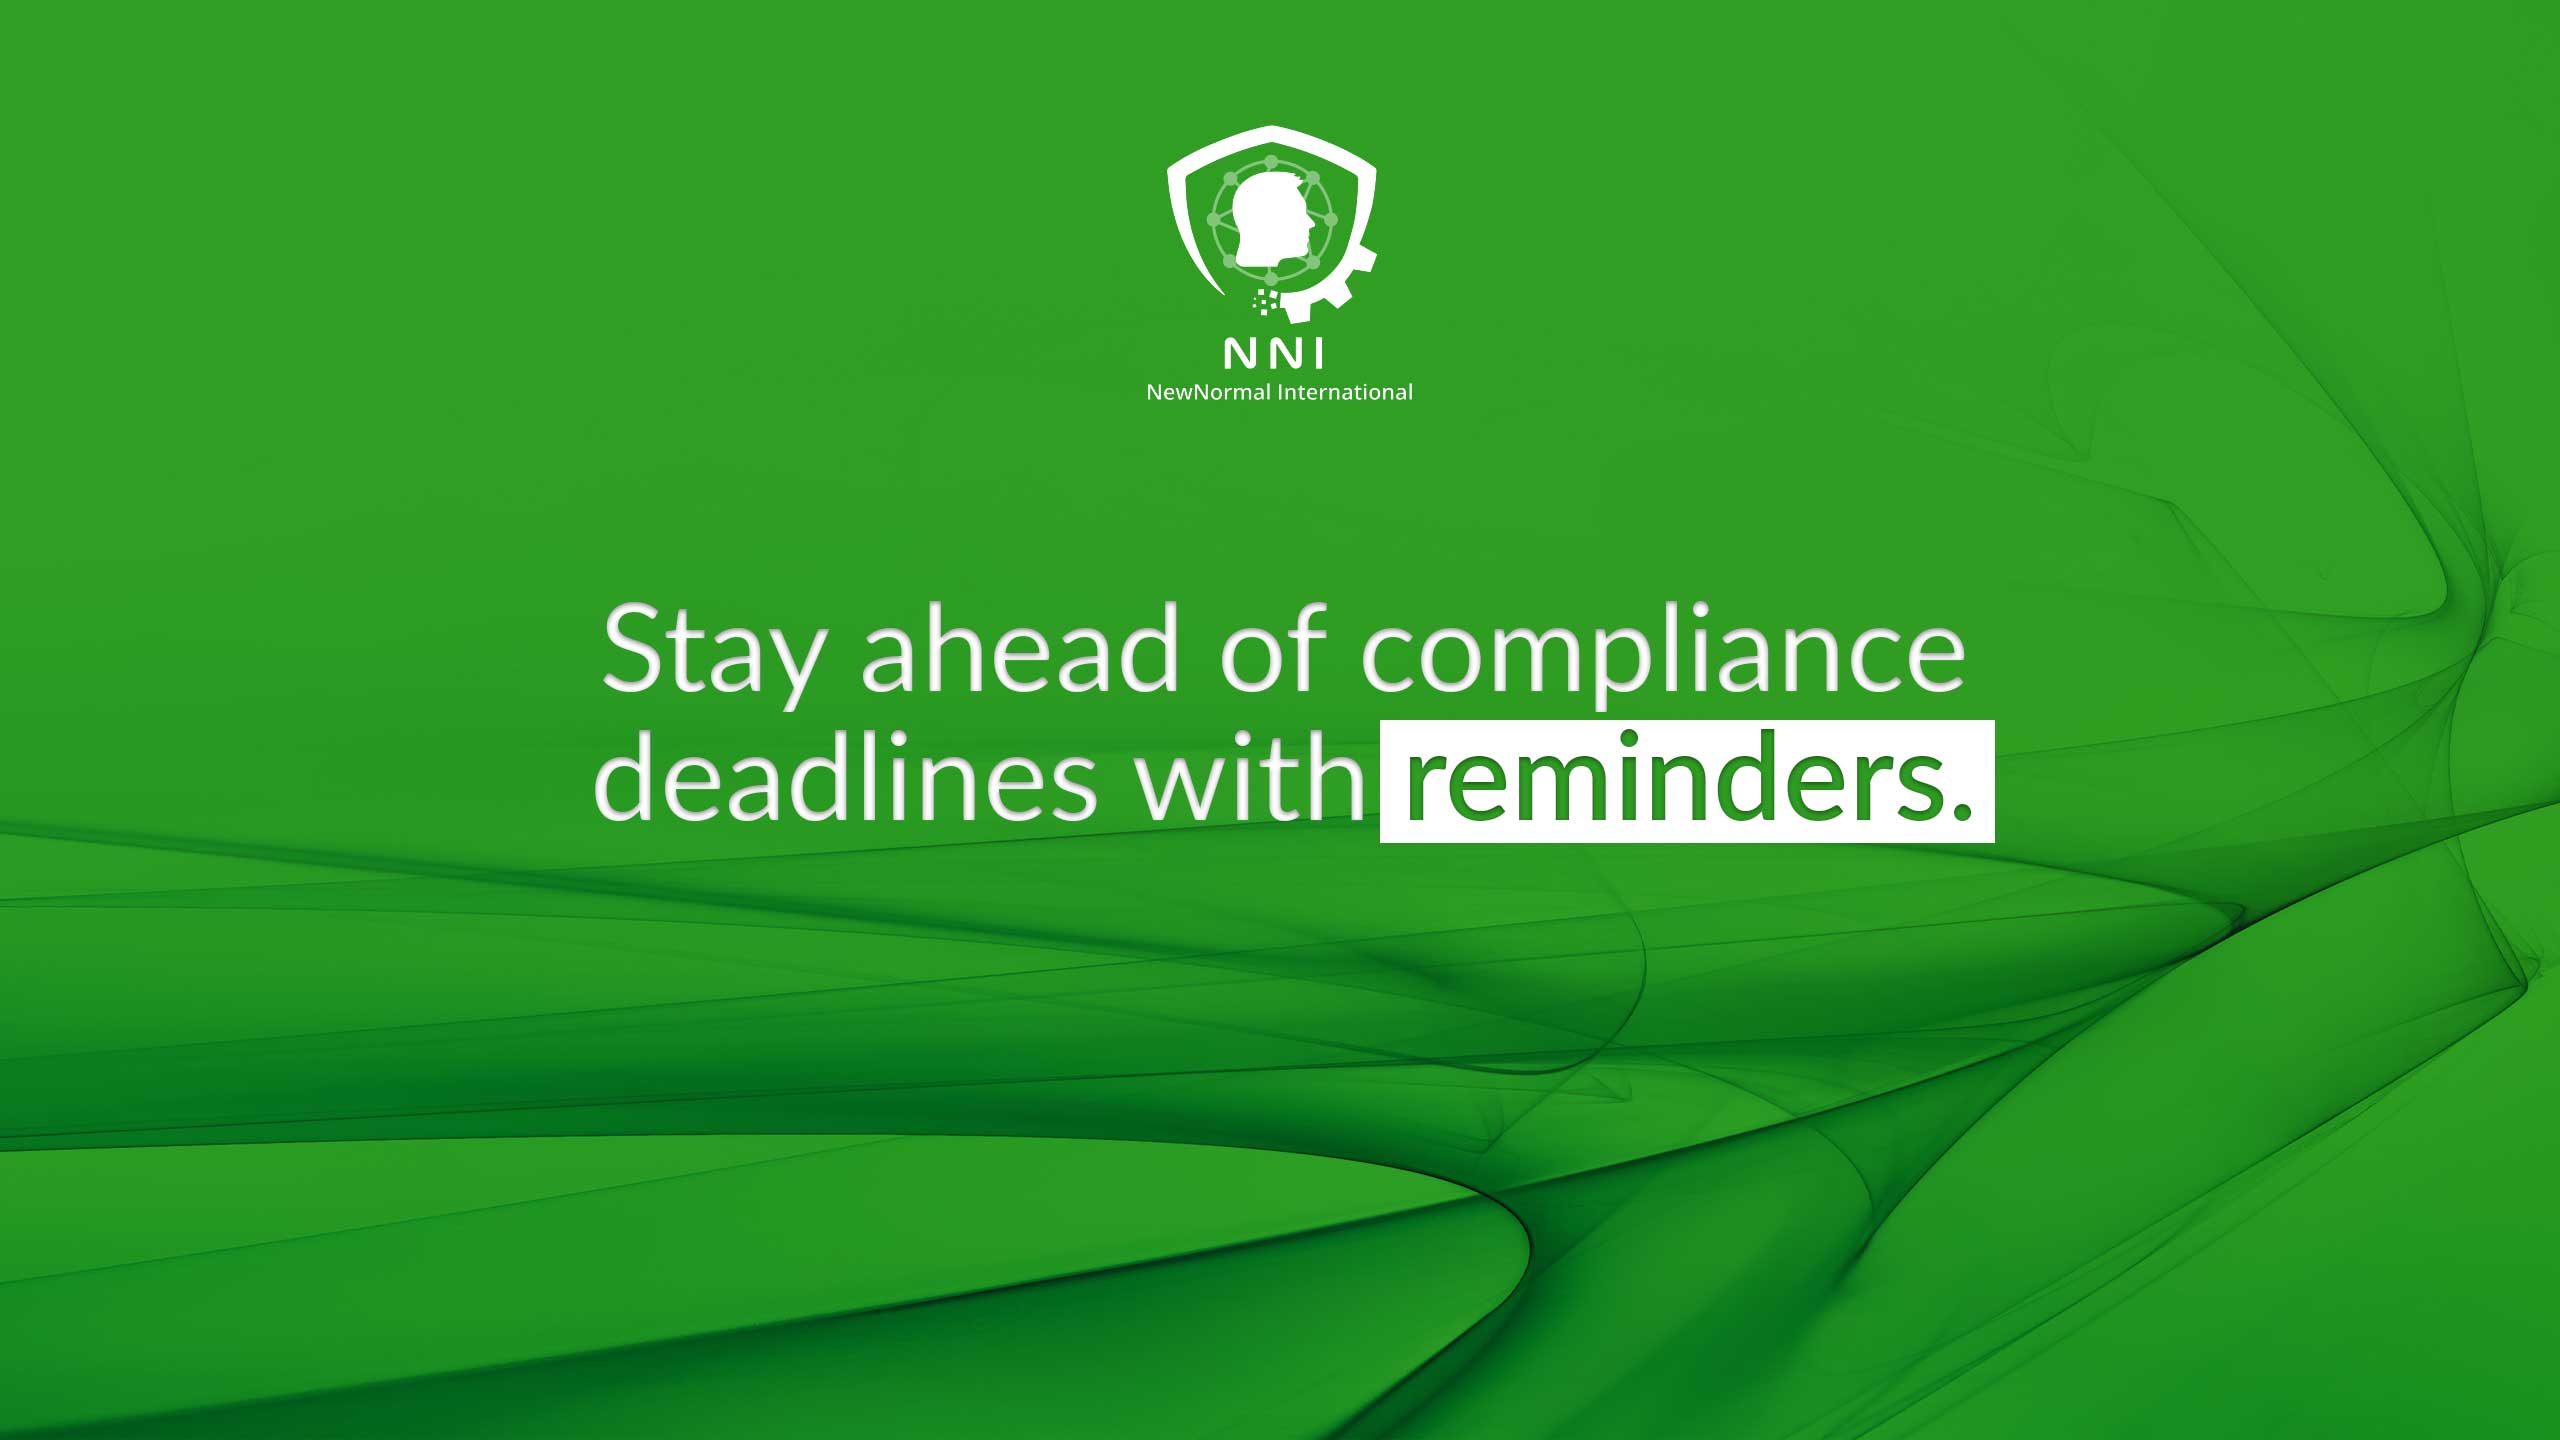 Stay Ahead of Compliance Deadlines with Reminders